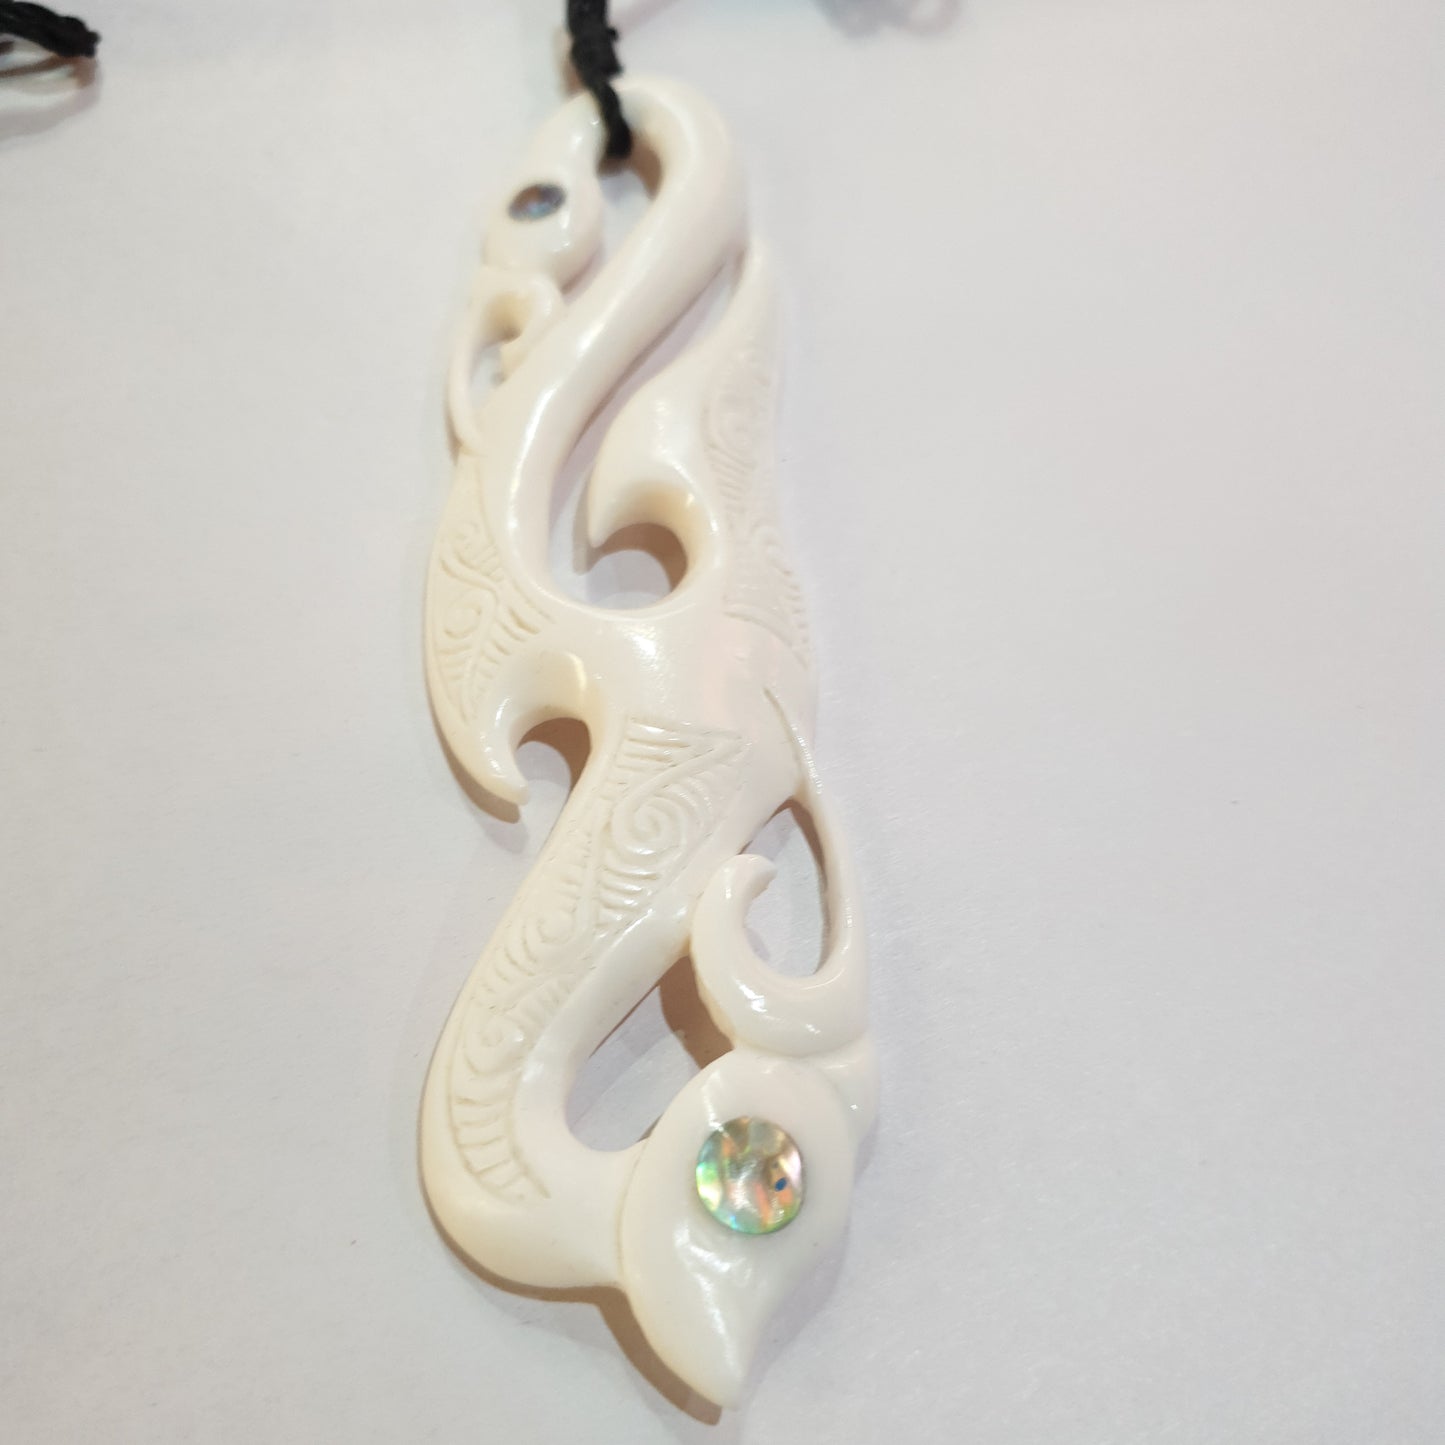 Hand Carved Bone Pendant large with adjustable cord - Rivendell Shop